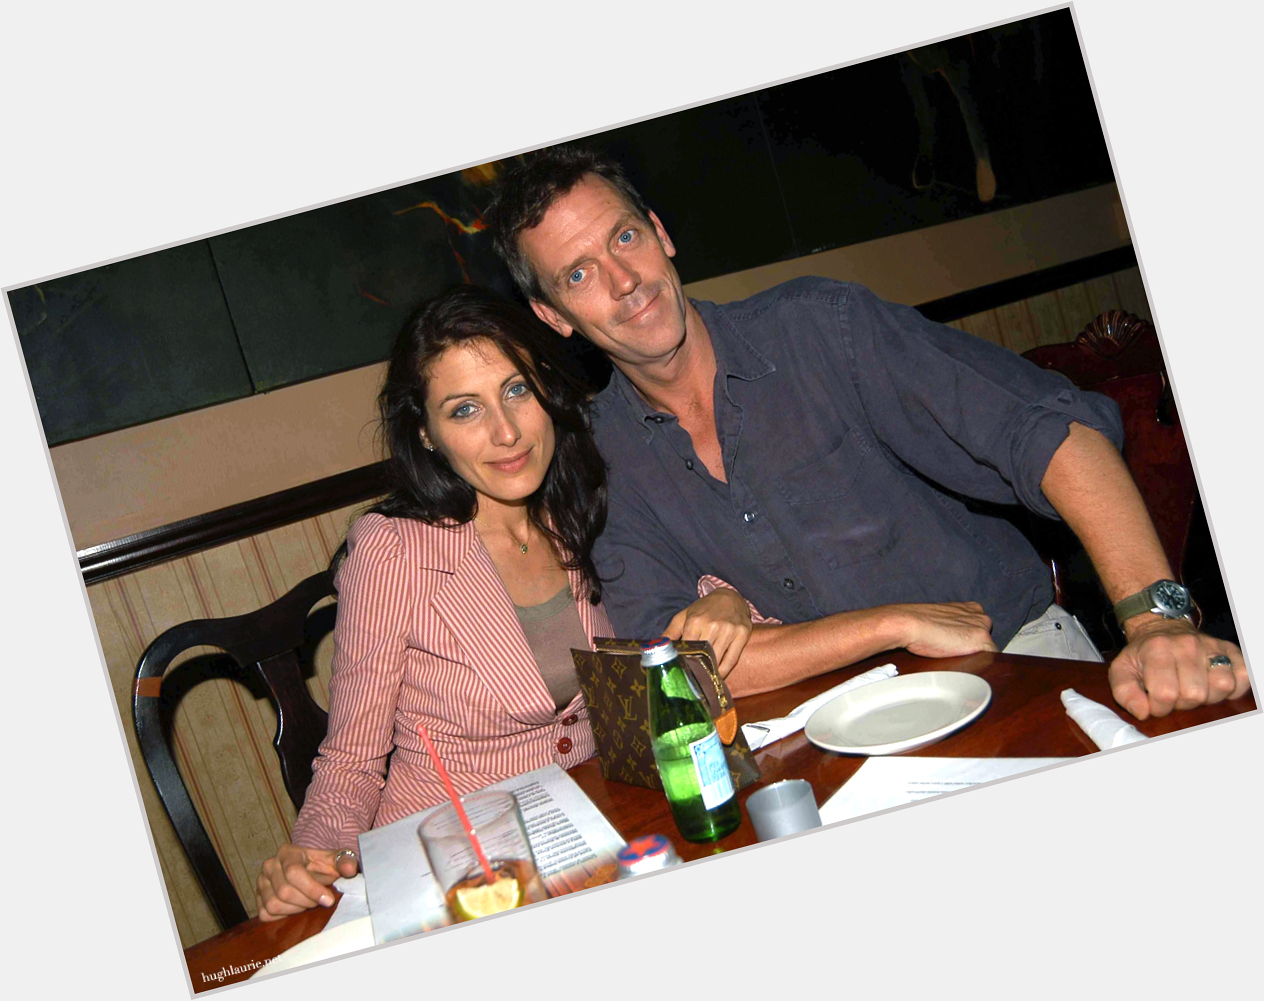 Everybody say happy birthday lisa edelstein

tbt to her 38th birthday in 2004 